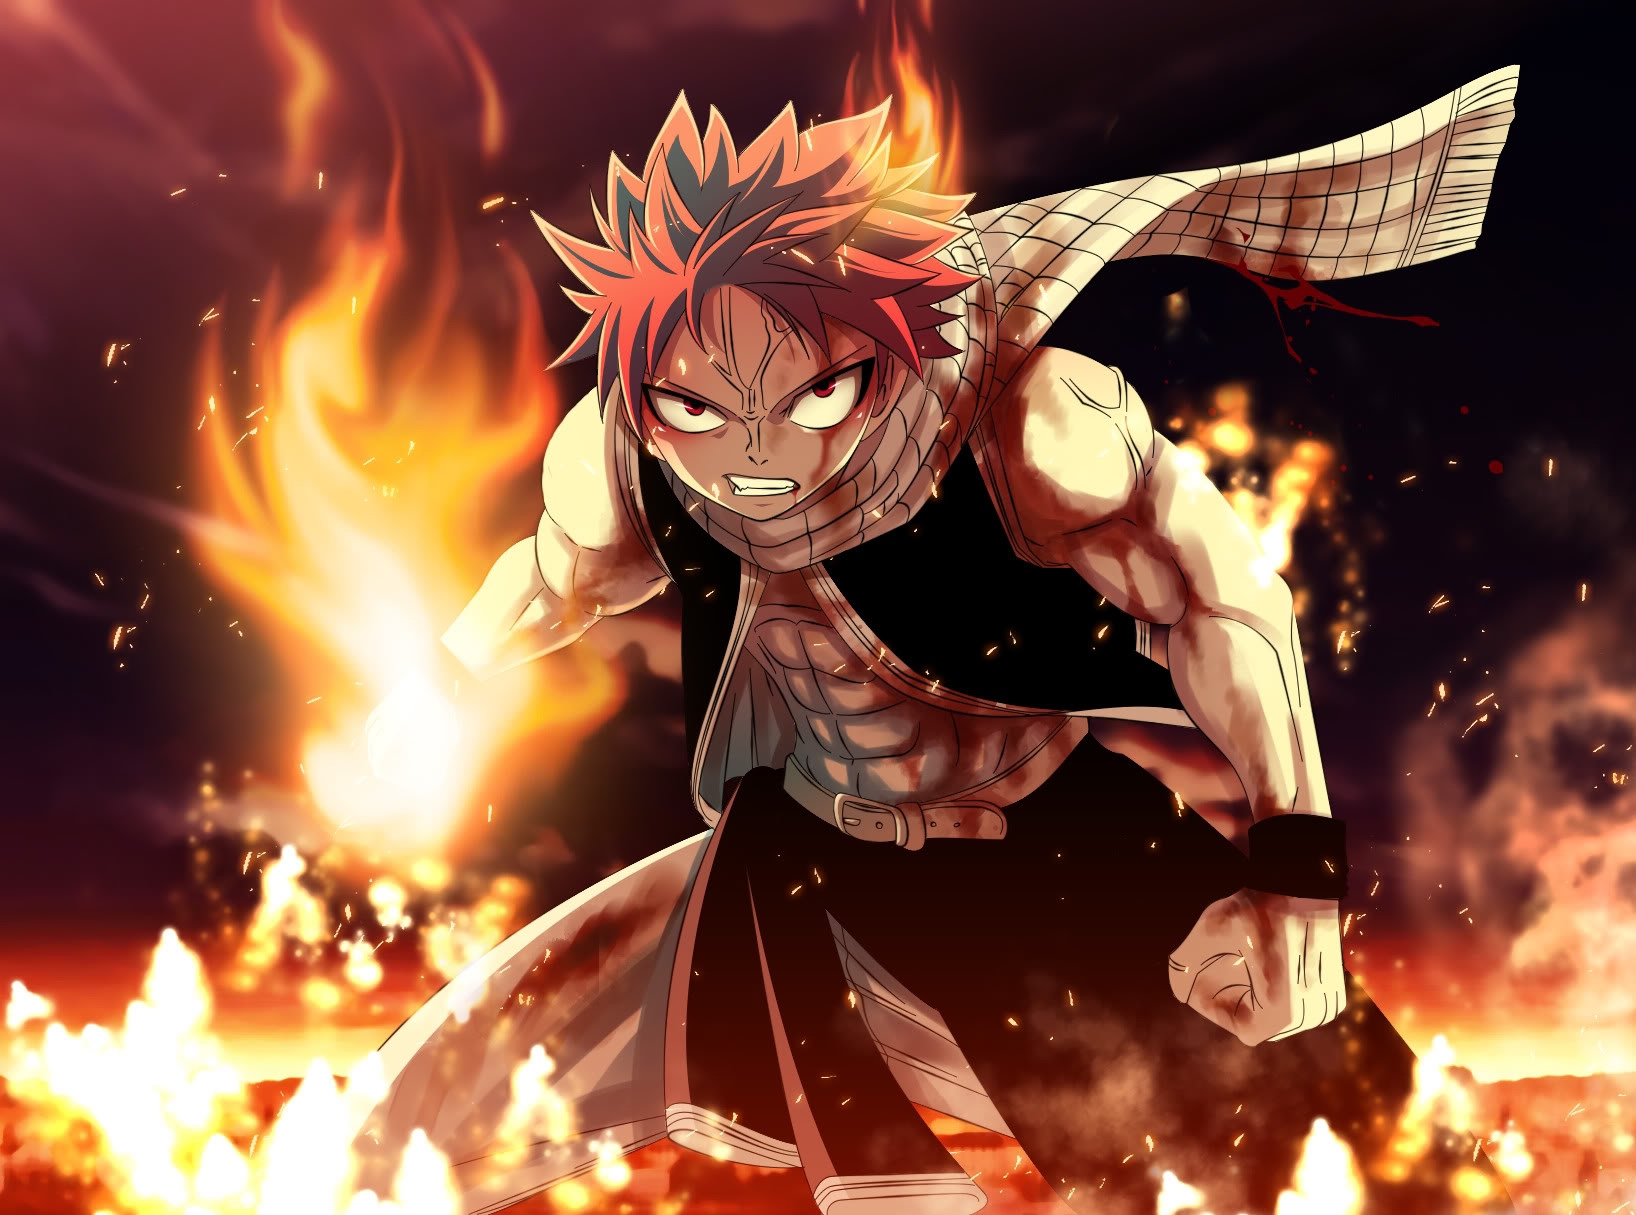 hinh nen fairy tail 24 - wallpaper free download